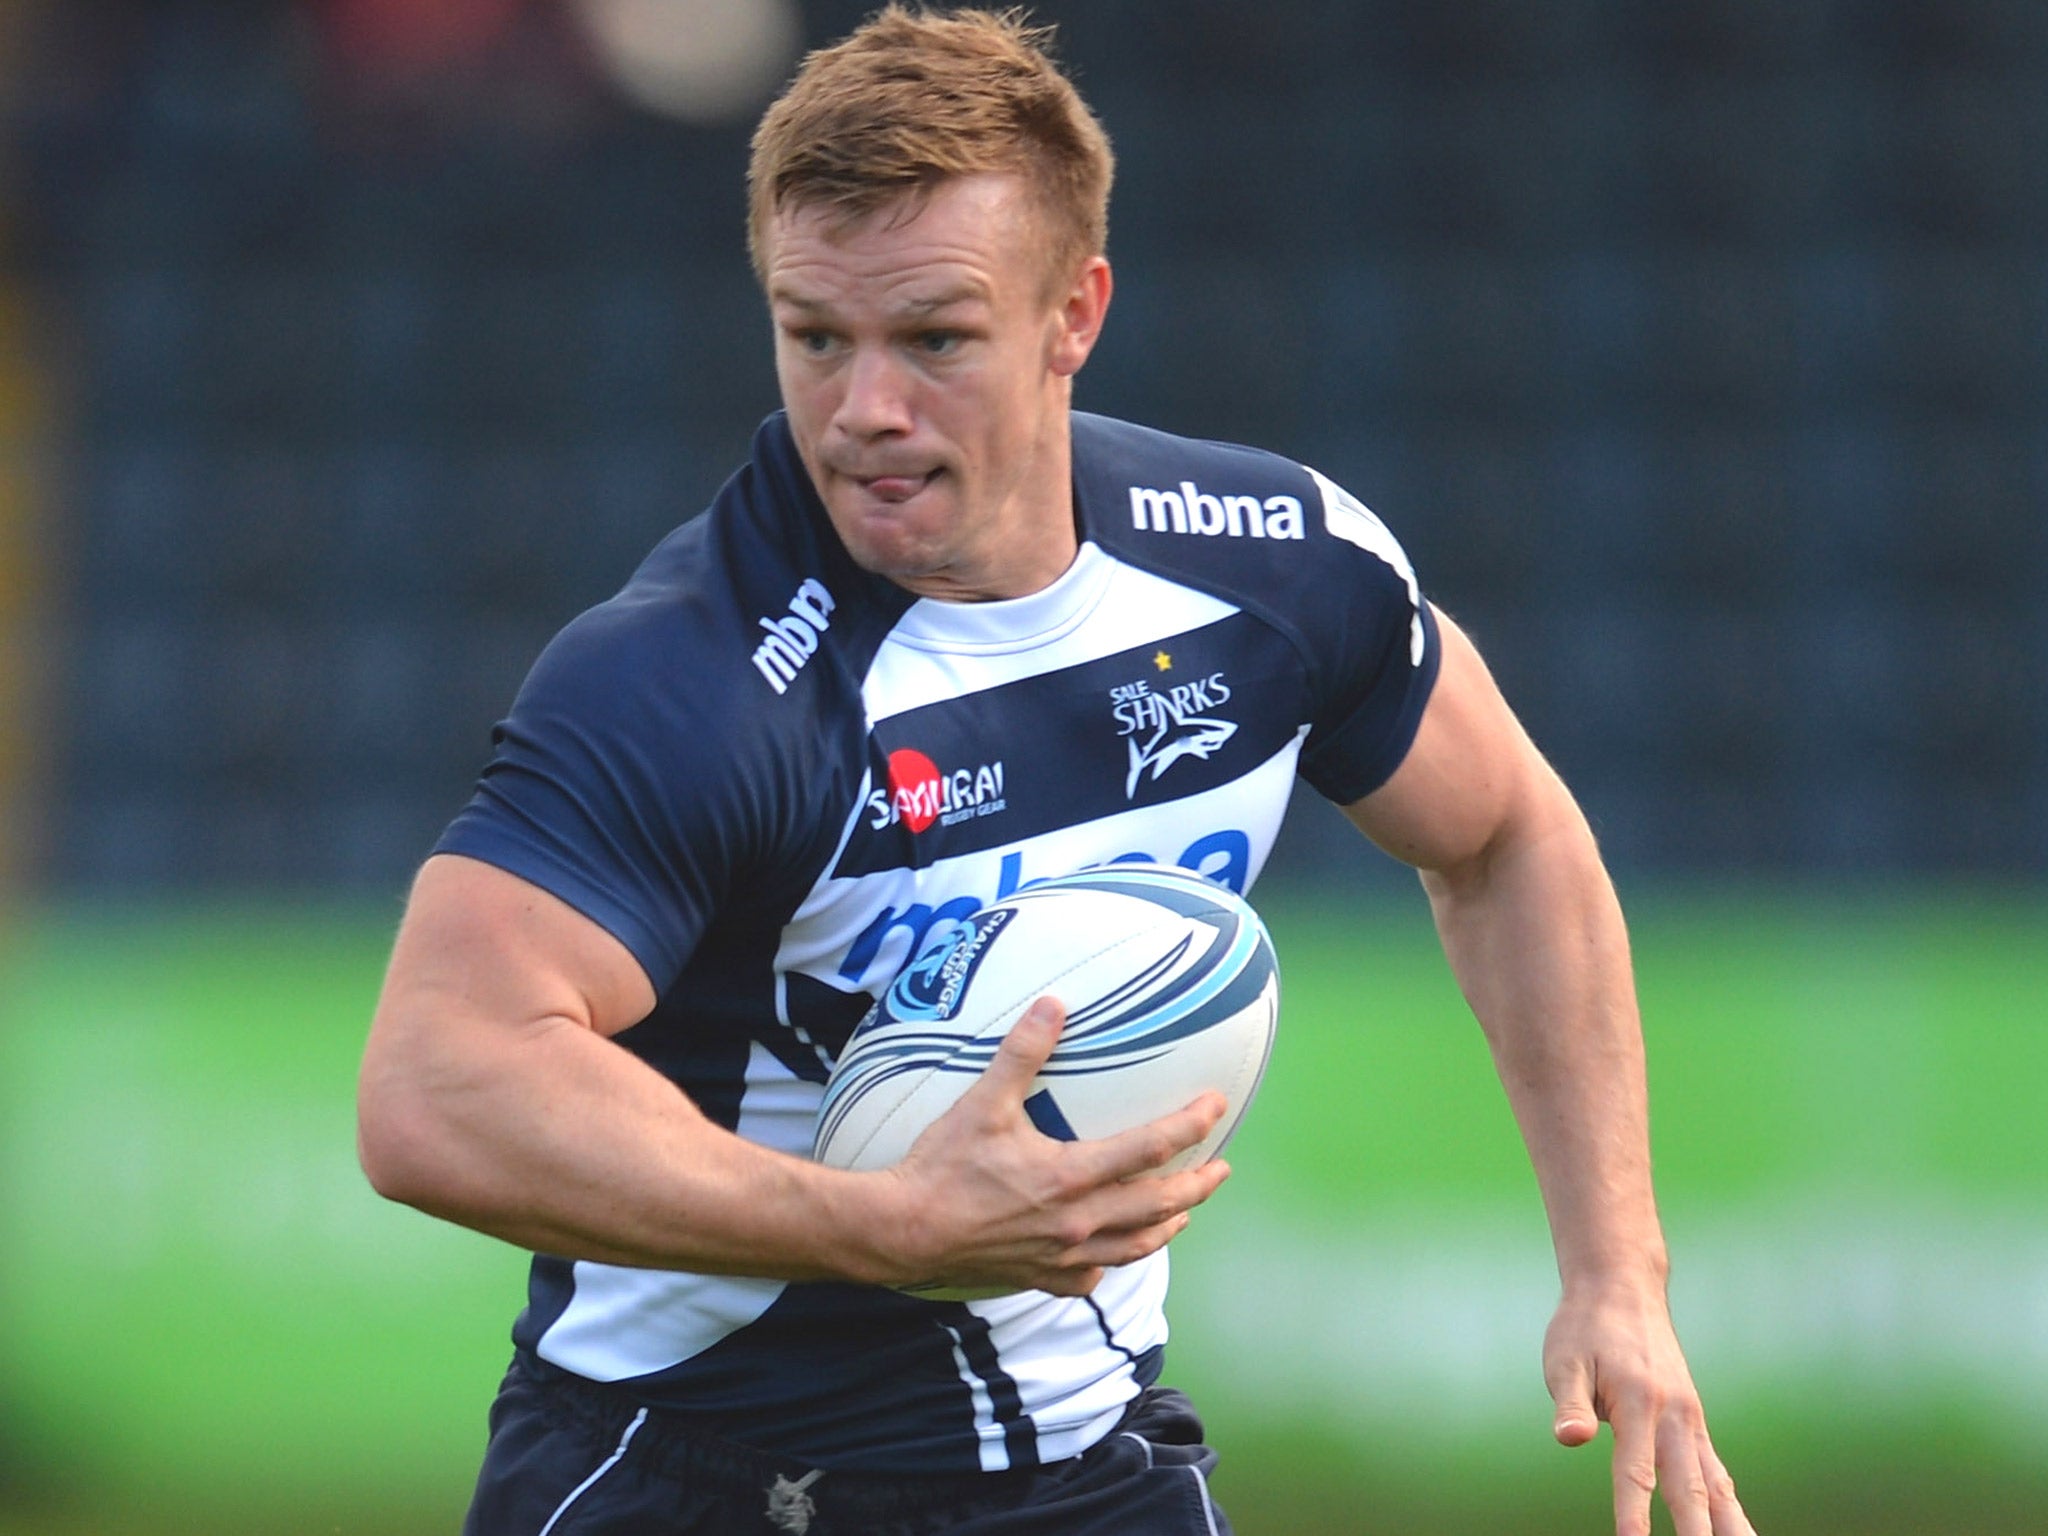 Welshman Dwayne Peel, a former Test Lion, will join Bristol from Sale Sharks at the end of the season